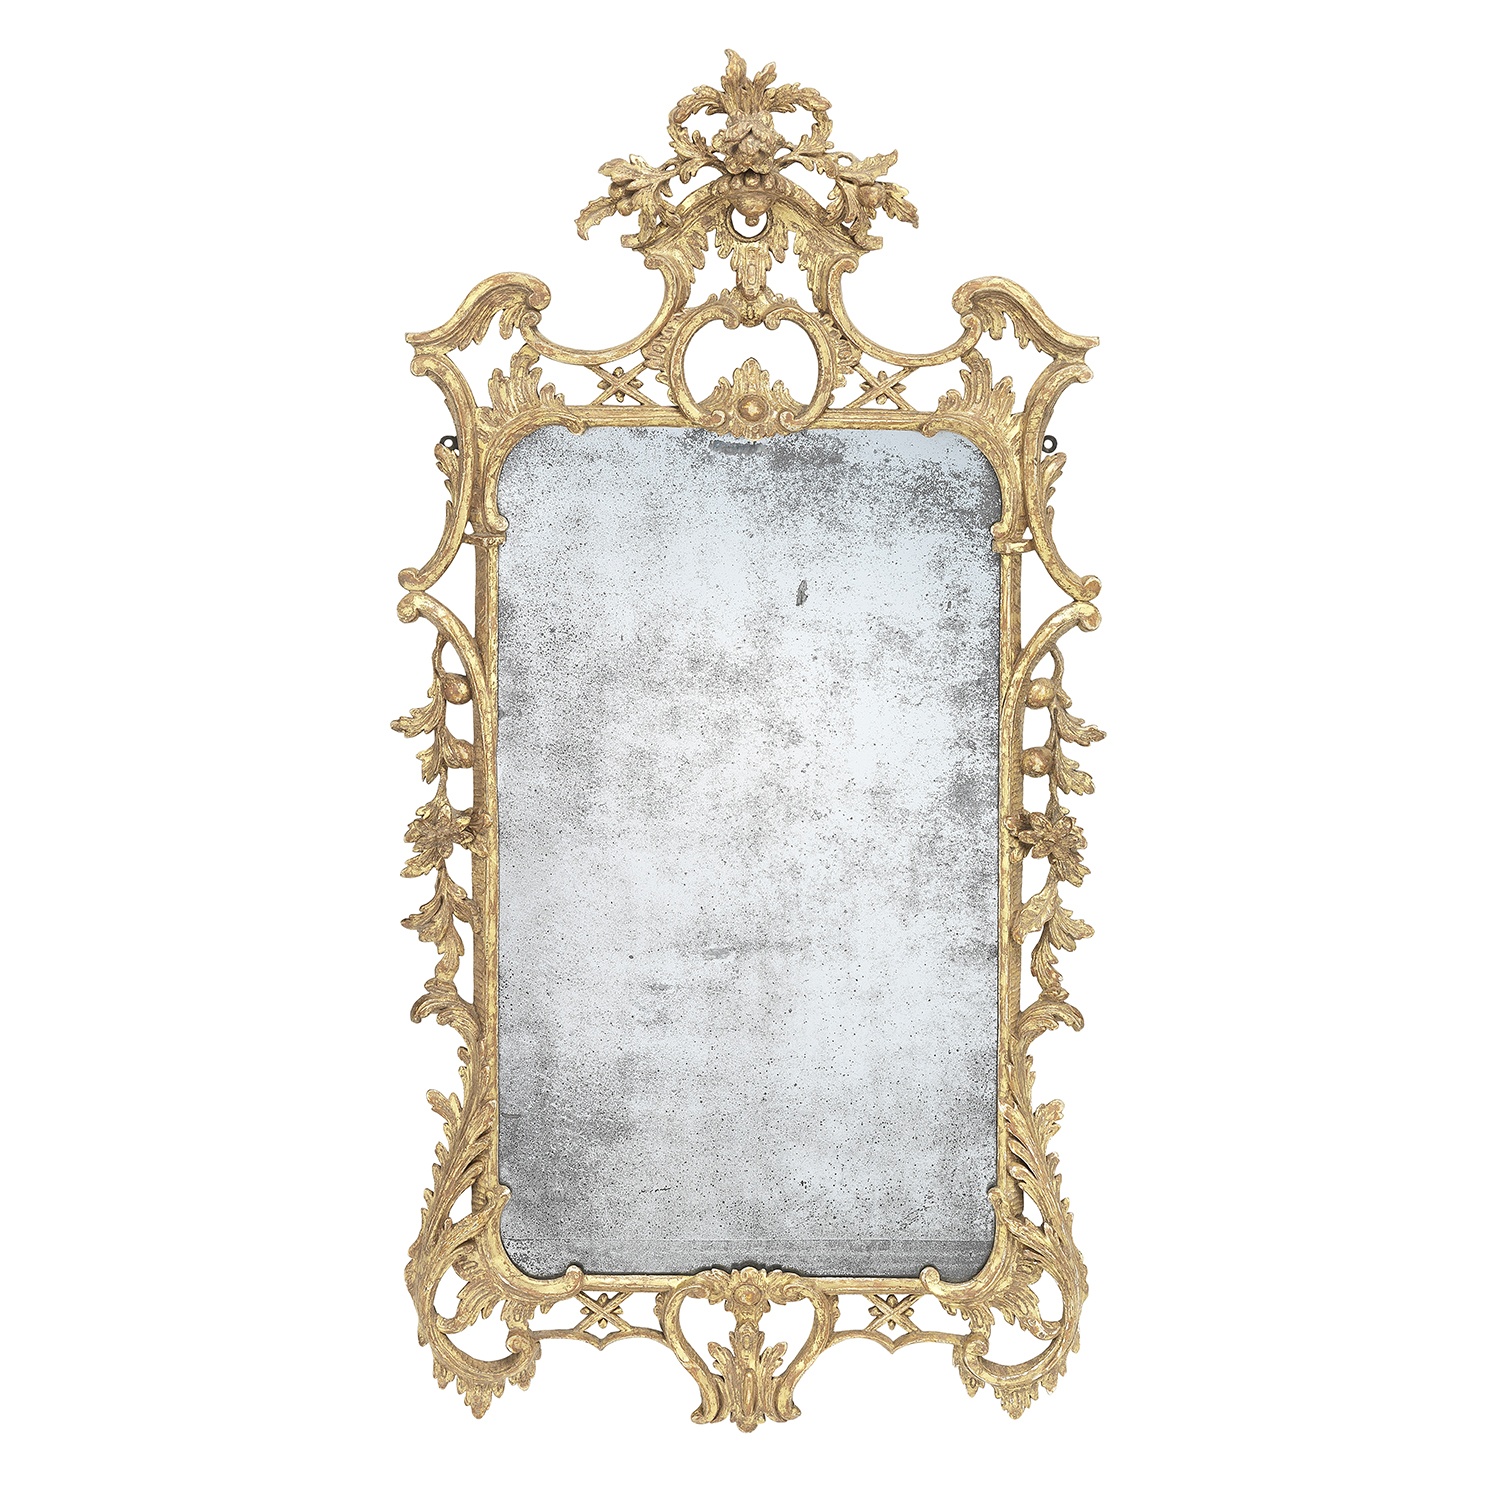 A George III Giltwood Mirror in the Manner of Thomas Johnson 1